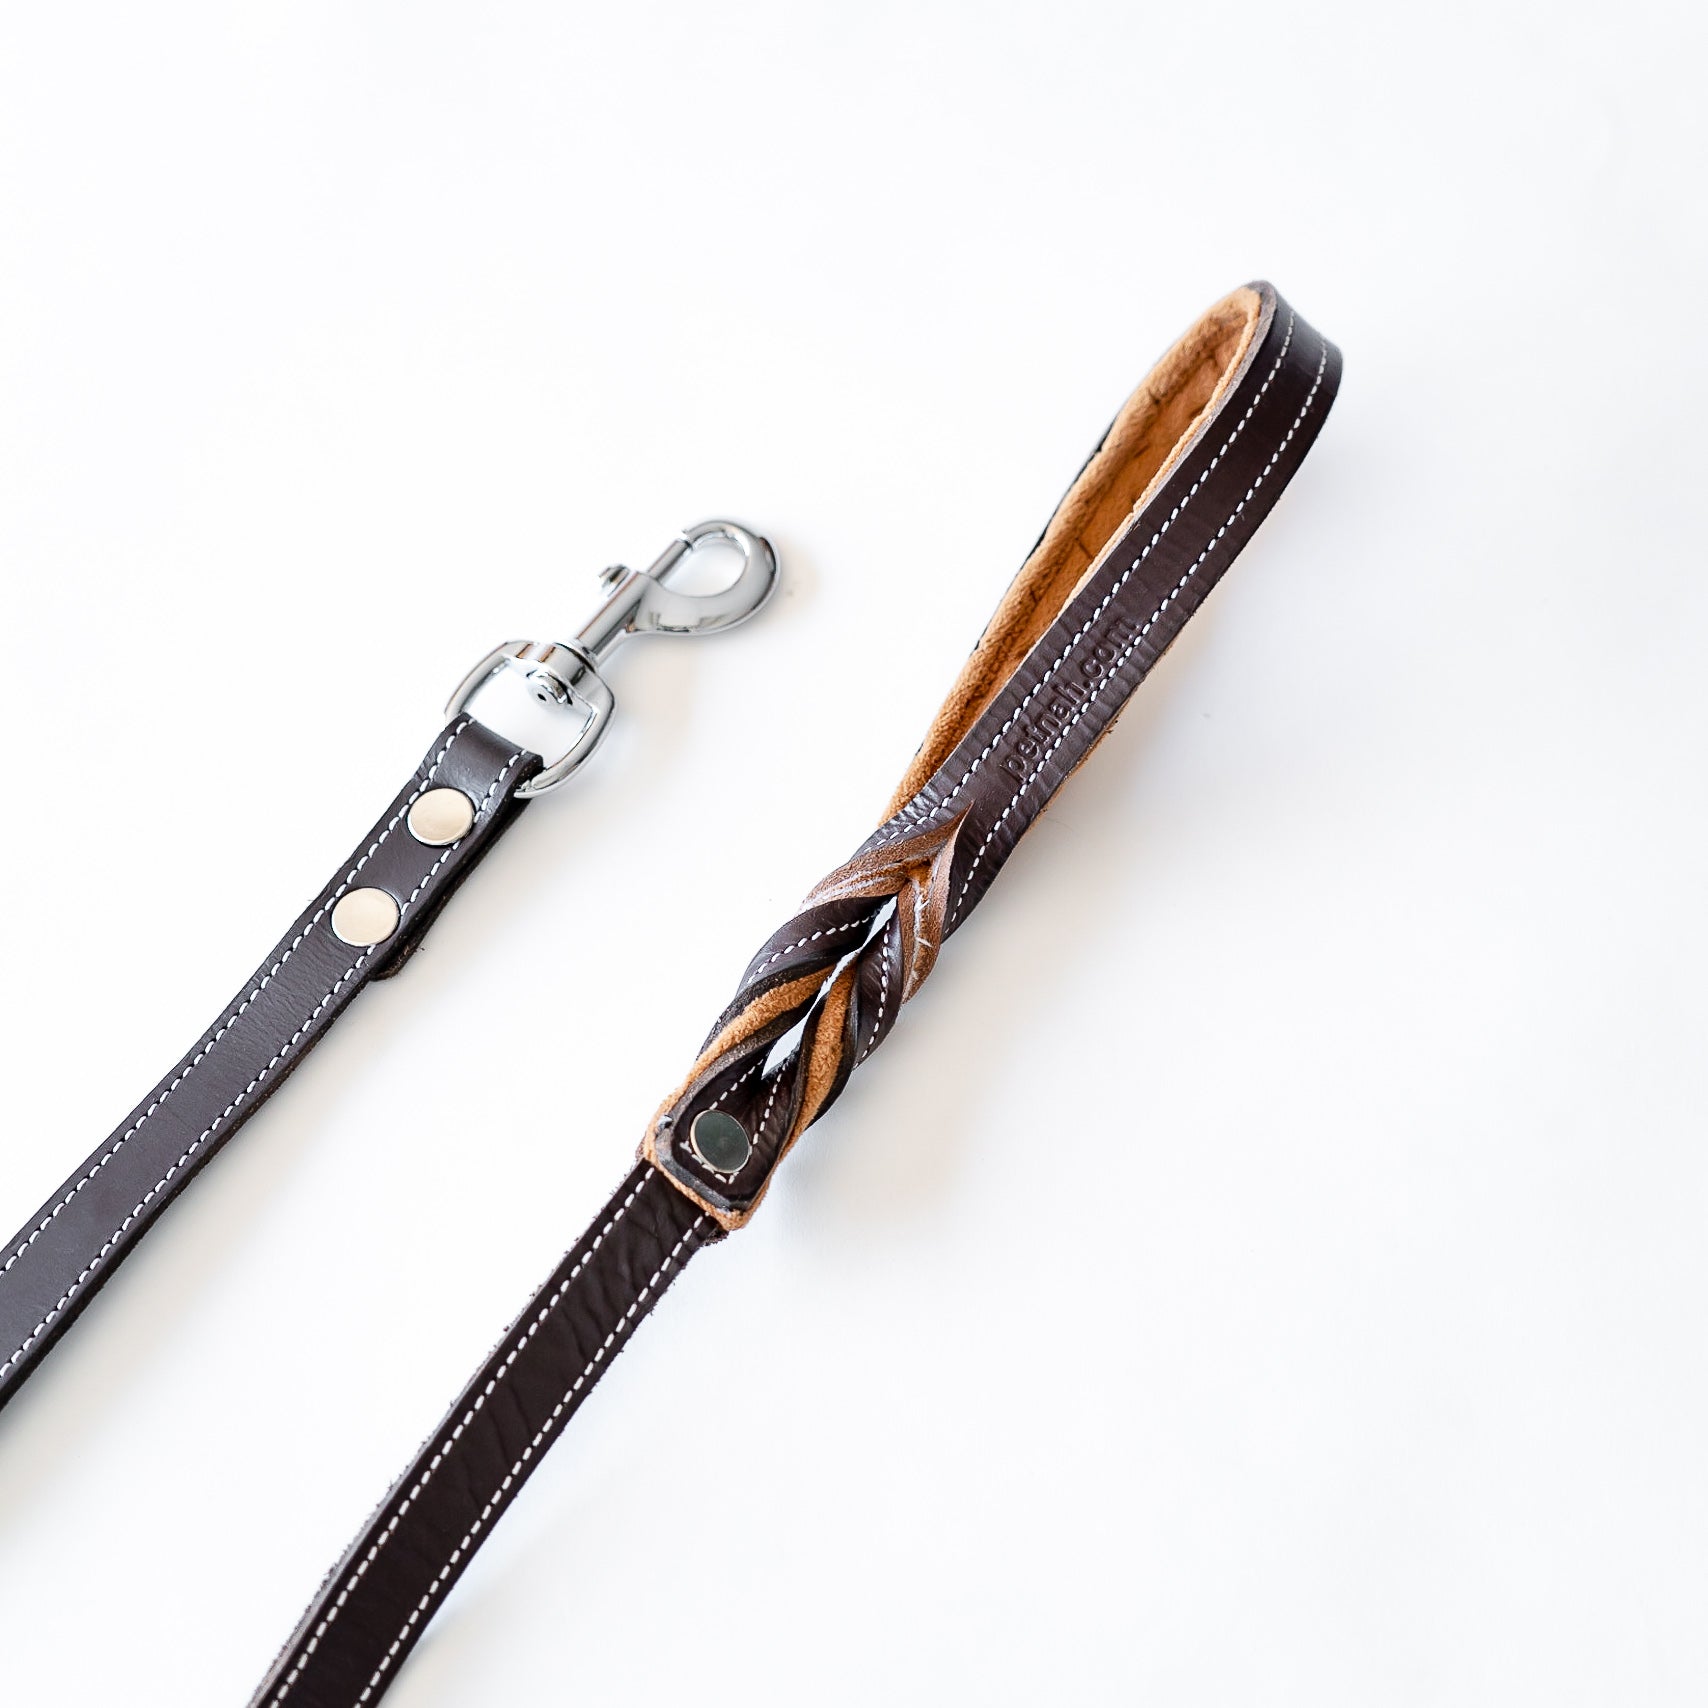 Lux Leather Leash - Best Leather Dog Leash